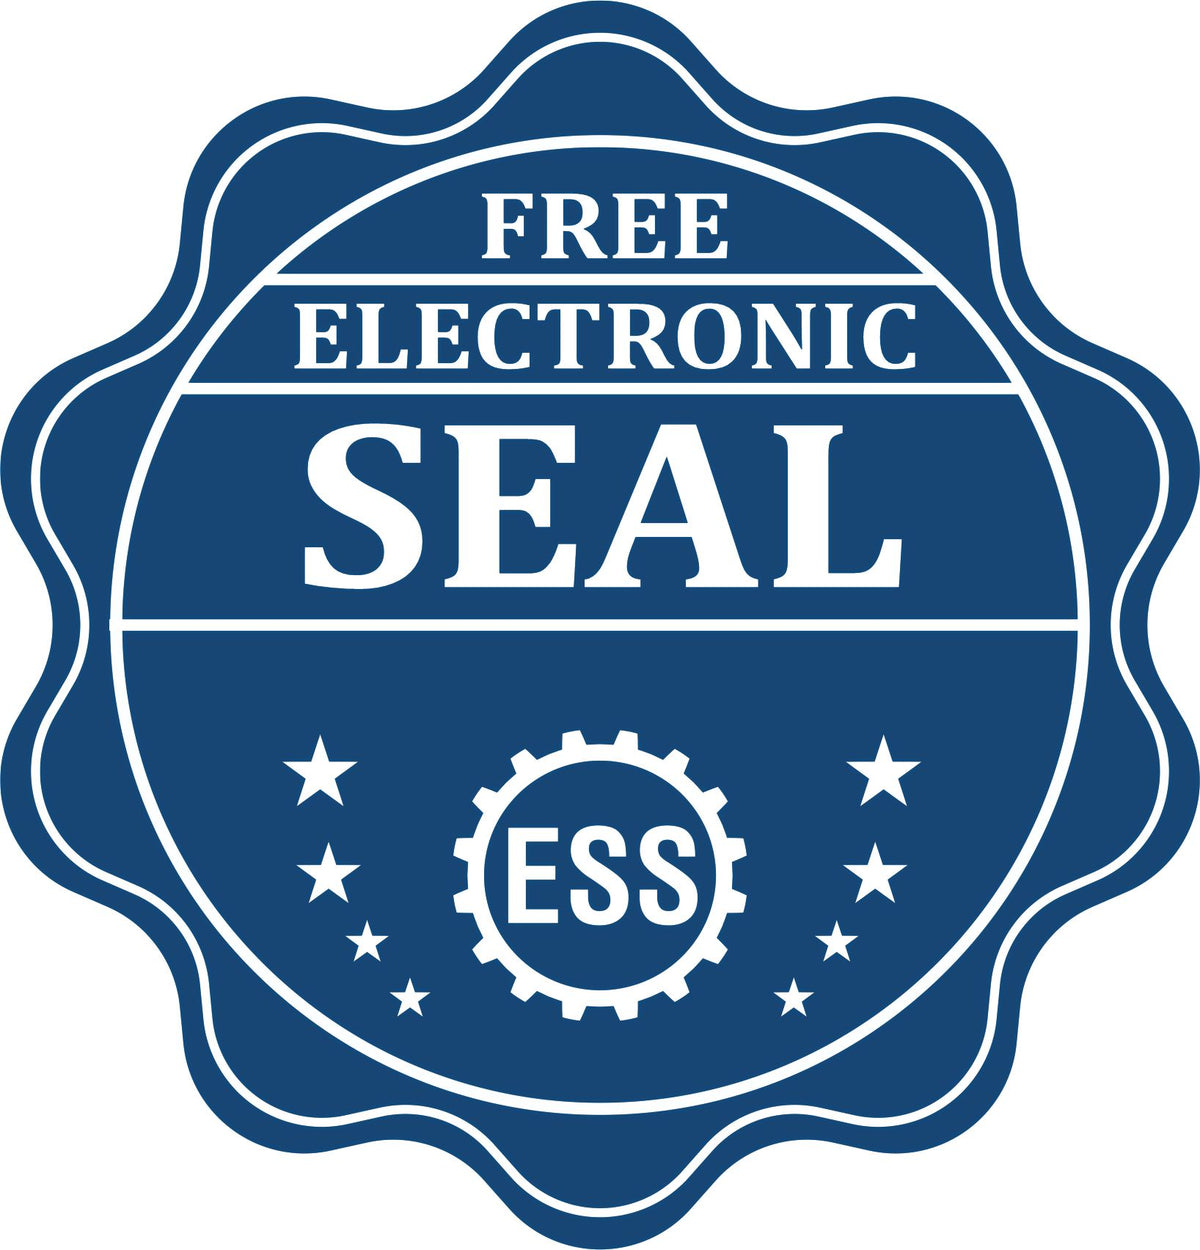 A badge showing a free electronic seal for the State of New Hampshire Extended Long Reach Engineer Seal with stars and the ESS gear on the emblem.